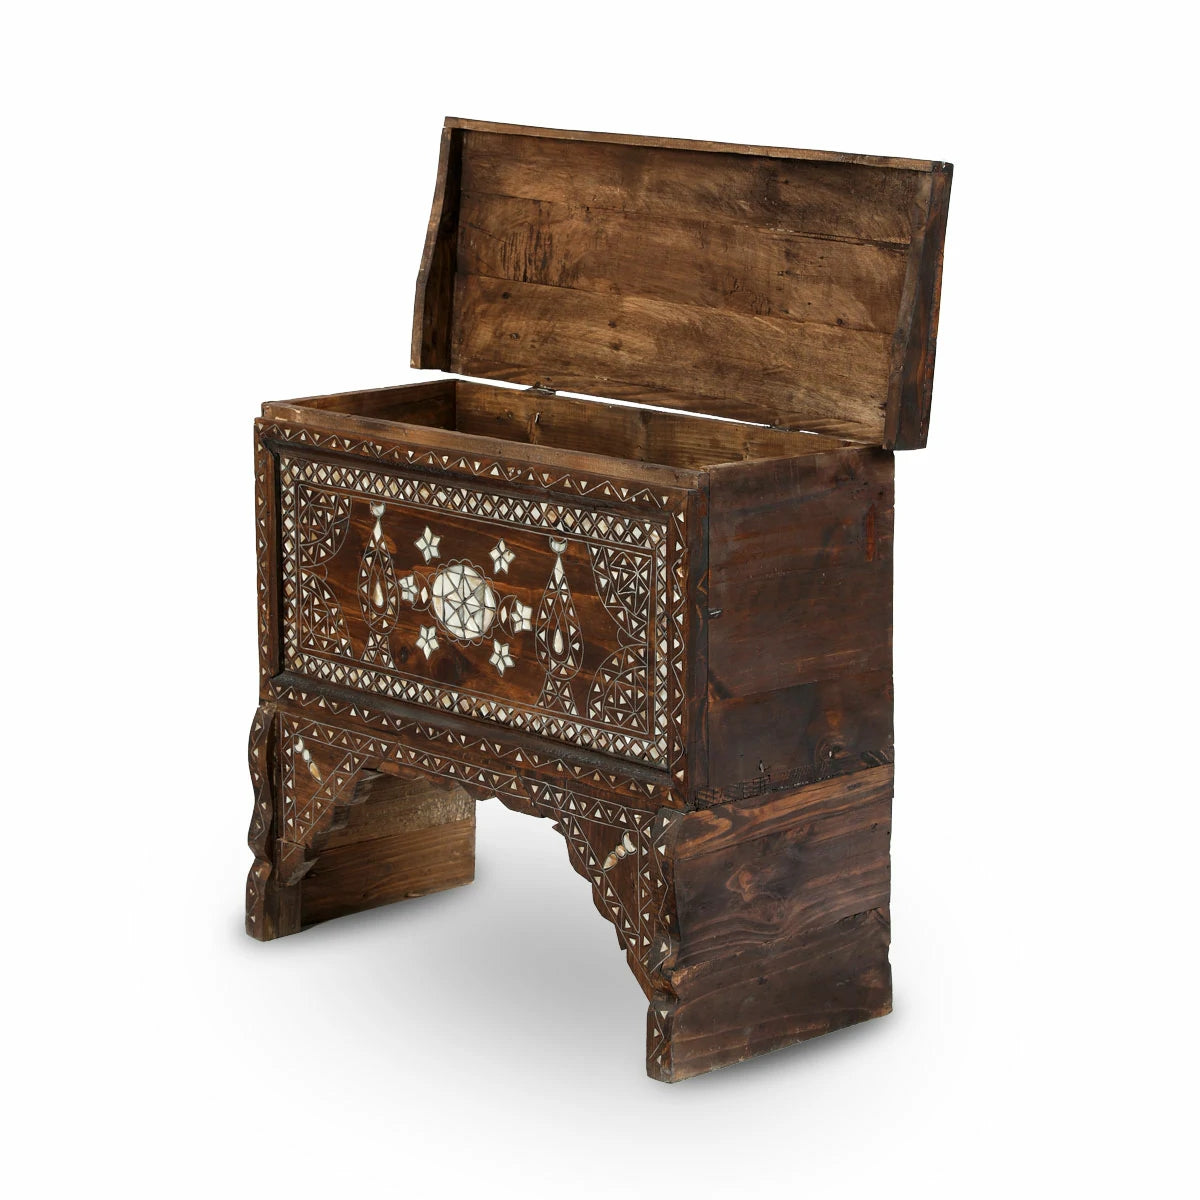 Angled View of Open Top Antique Syrian Wooden Chest Console